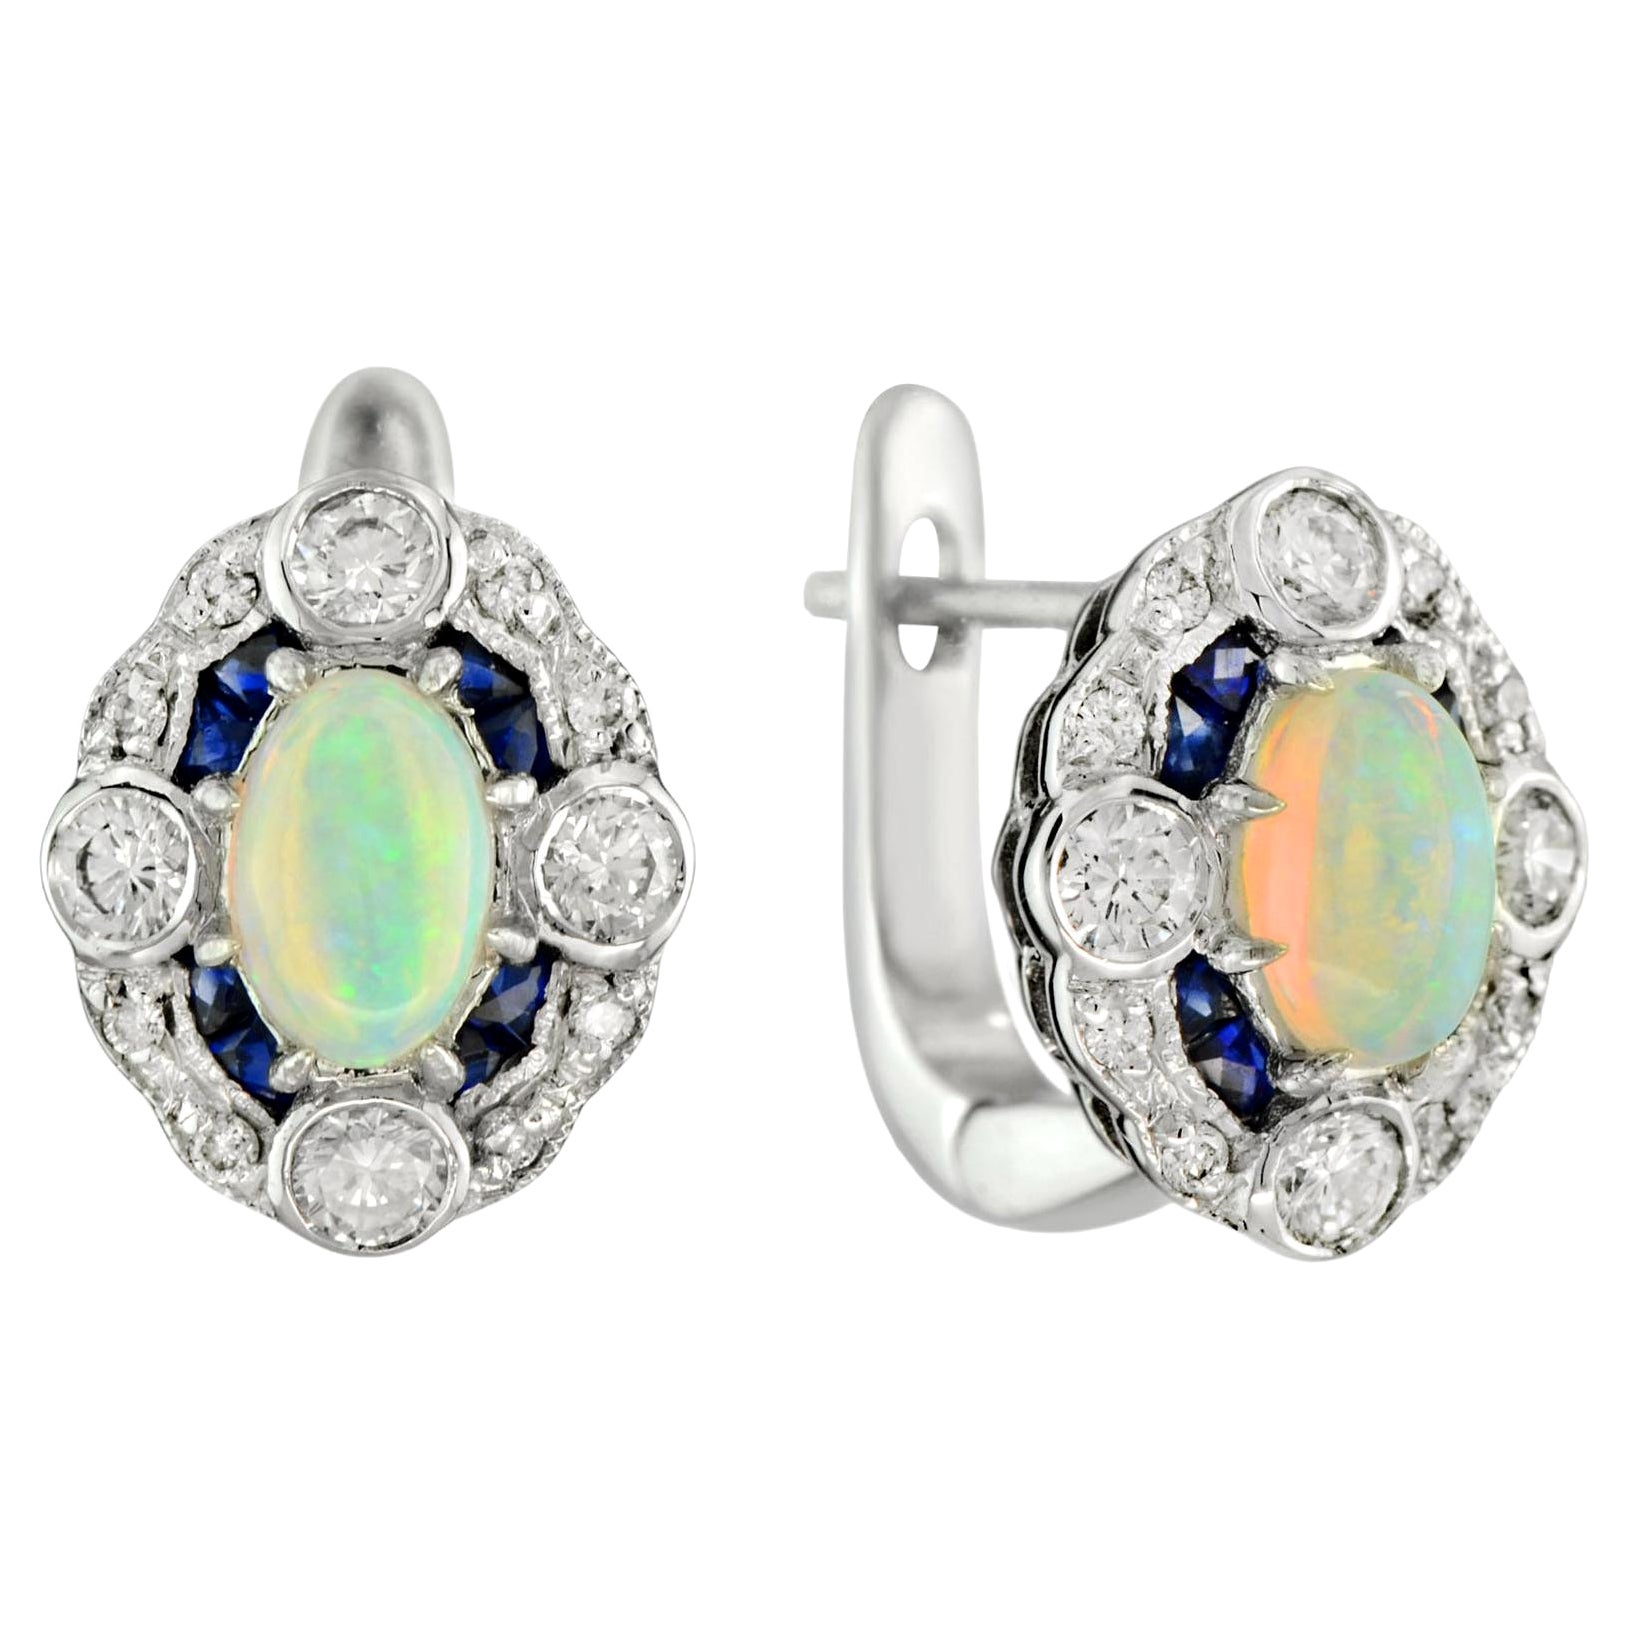 Opal with Diamond and Sapphire Latch Back Earrings in 18K White Gold